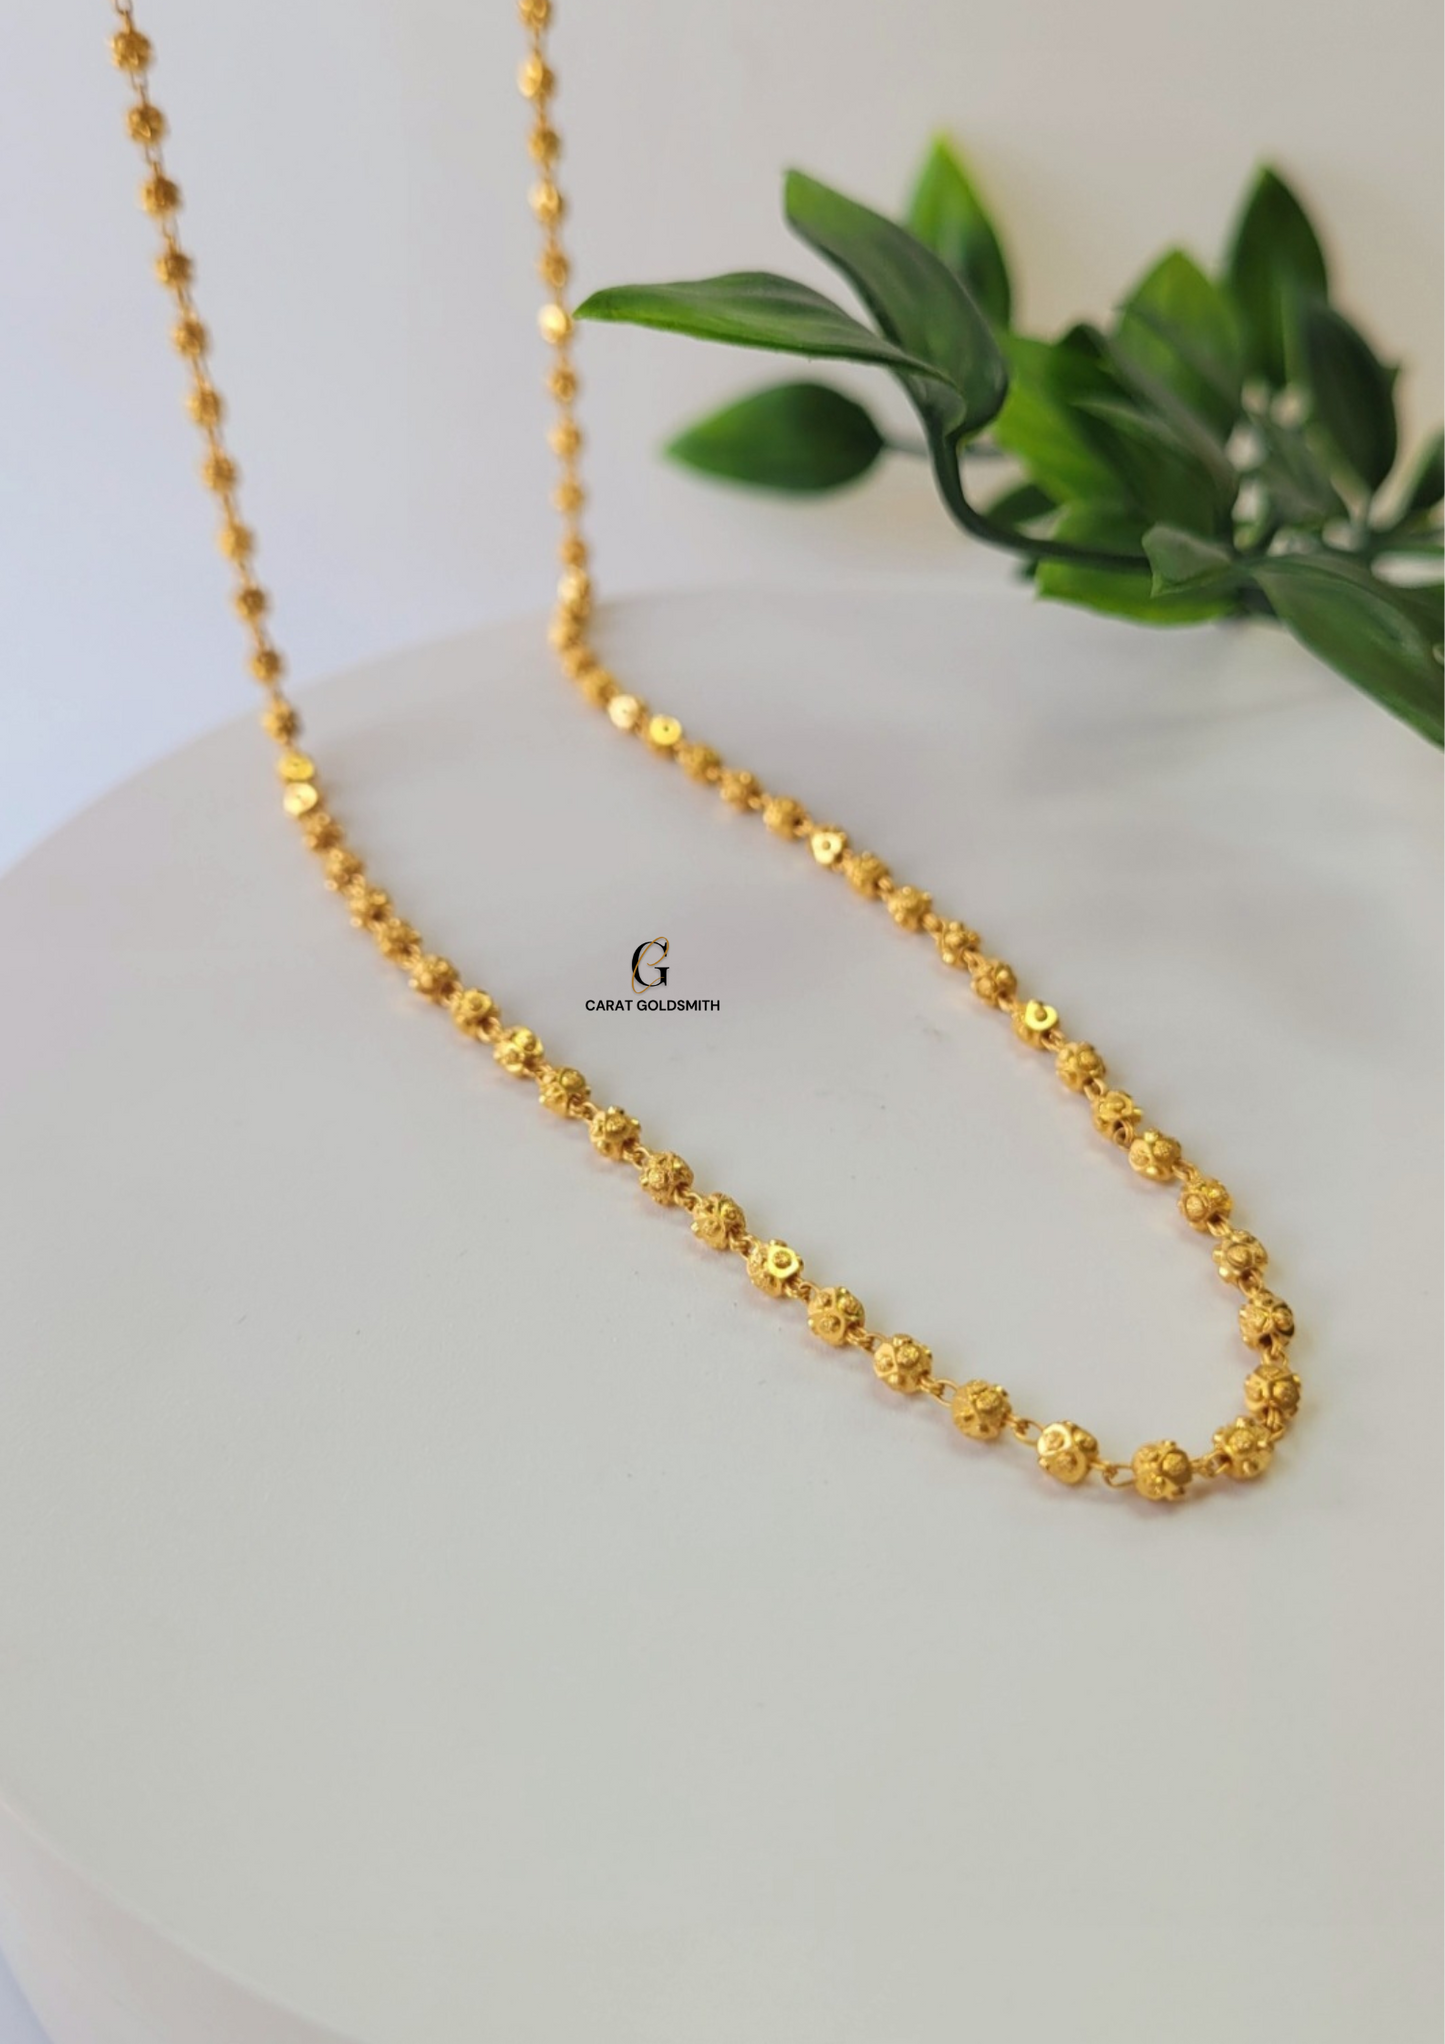 INTRICATE GOLD BALL CHAIN